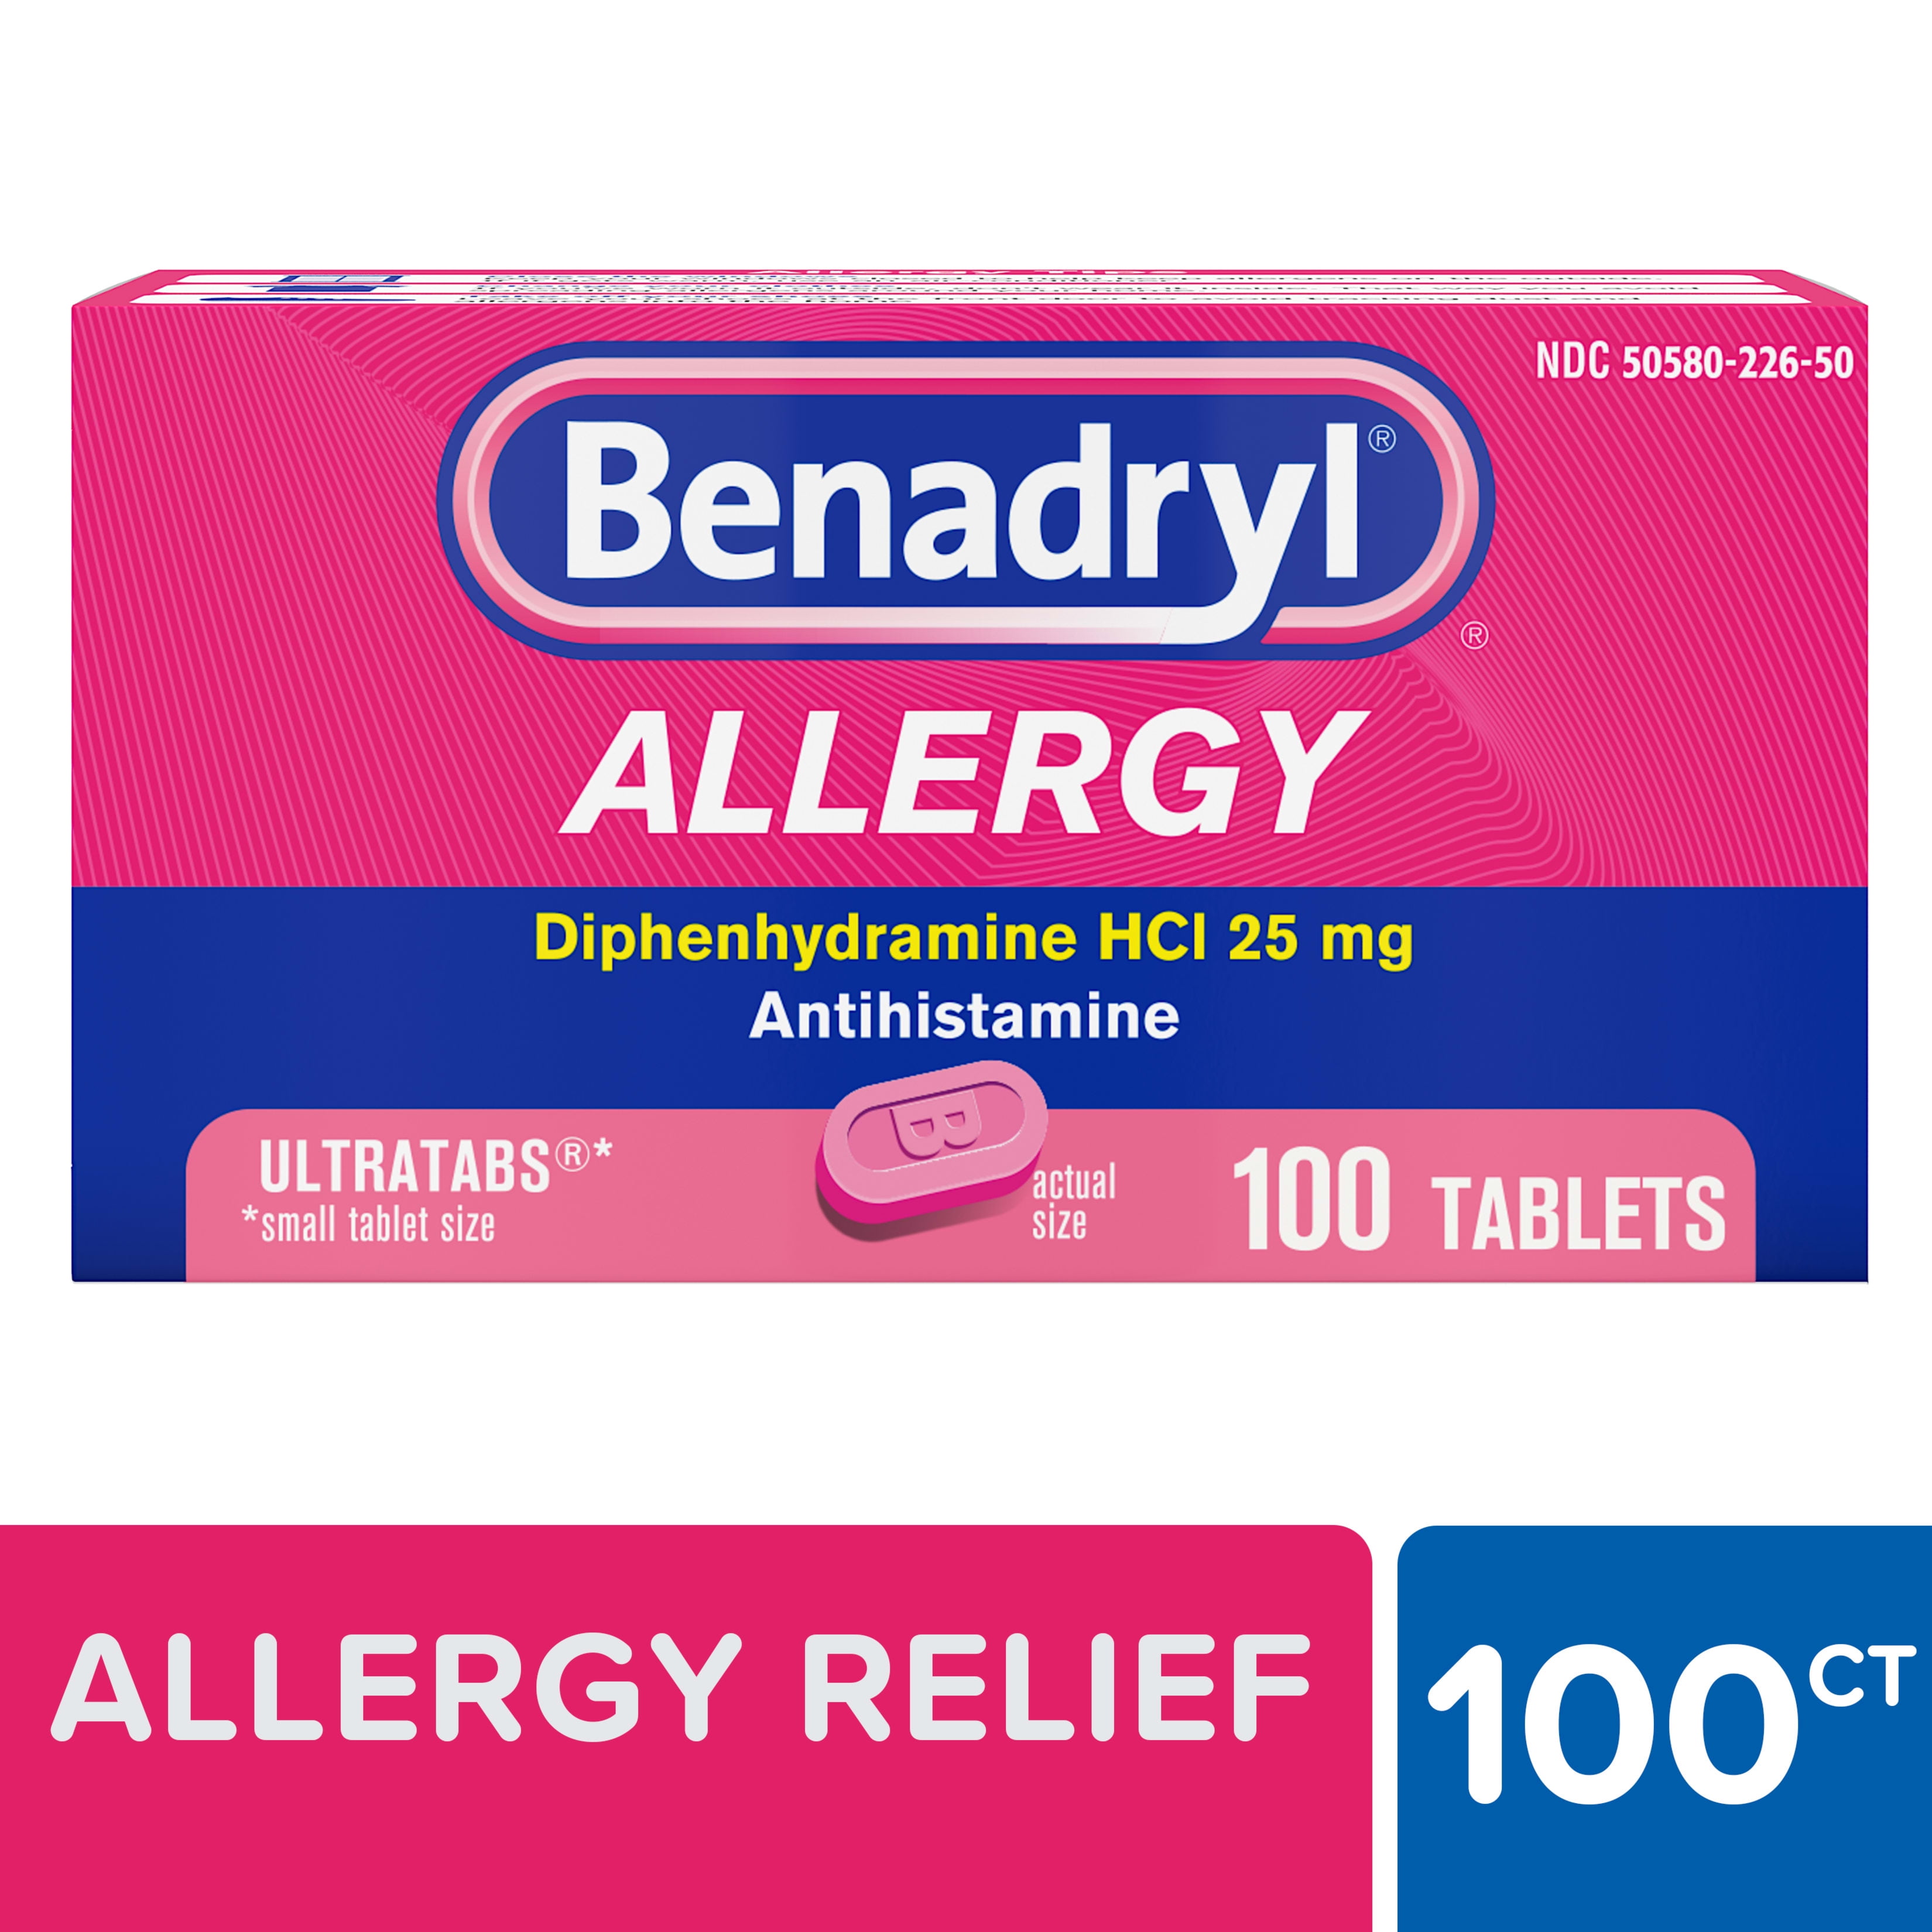 can you give a dog benadryl for itchy ears